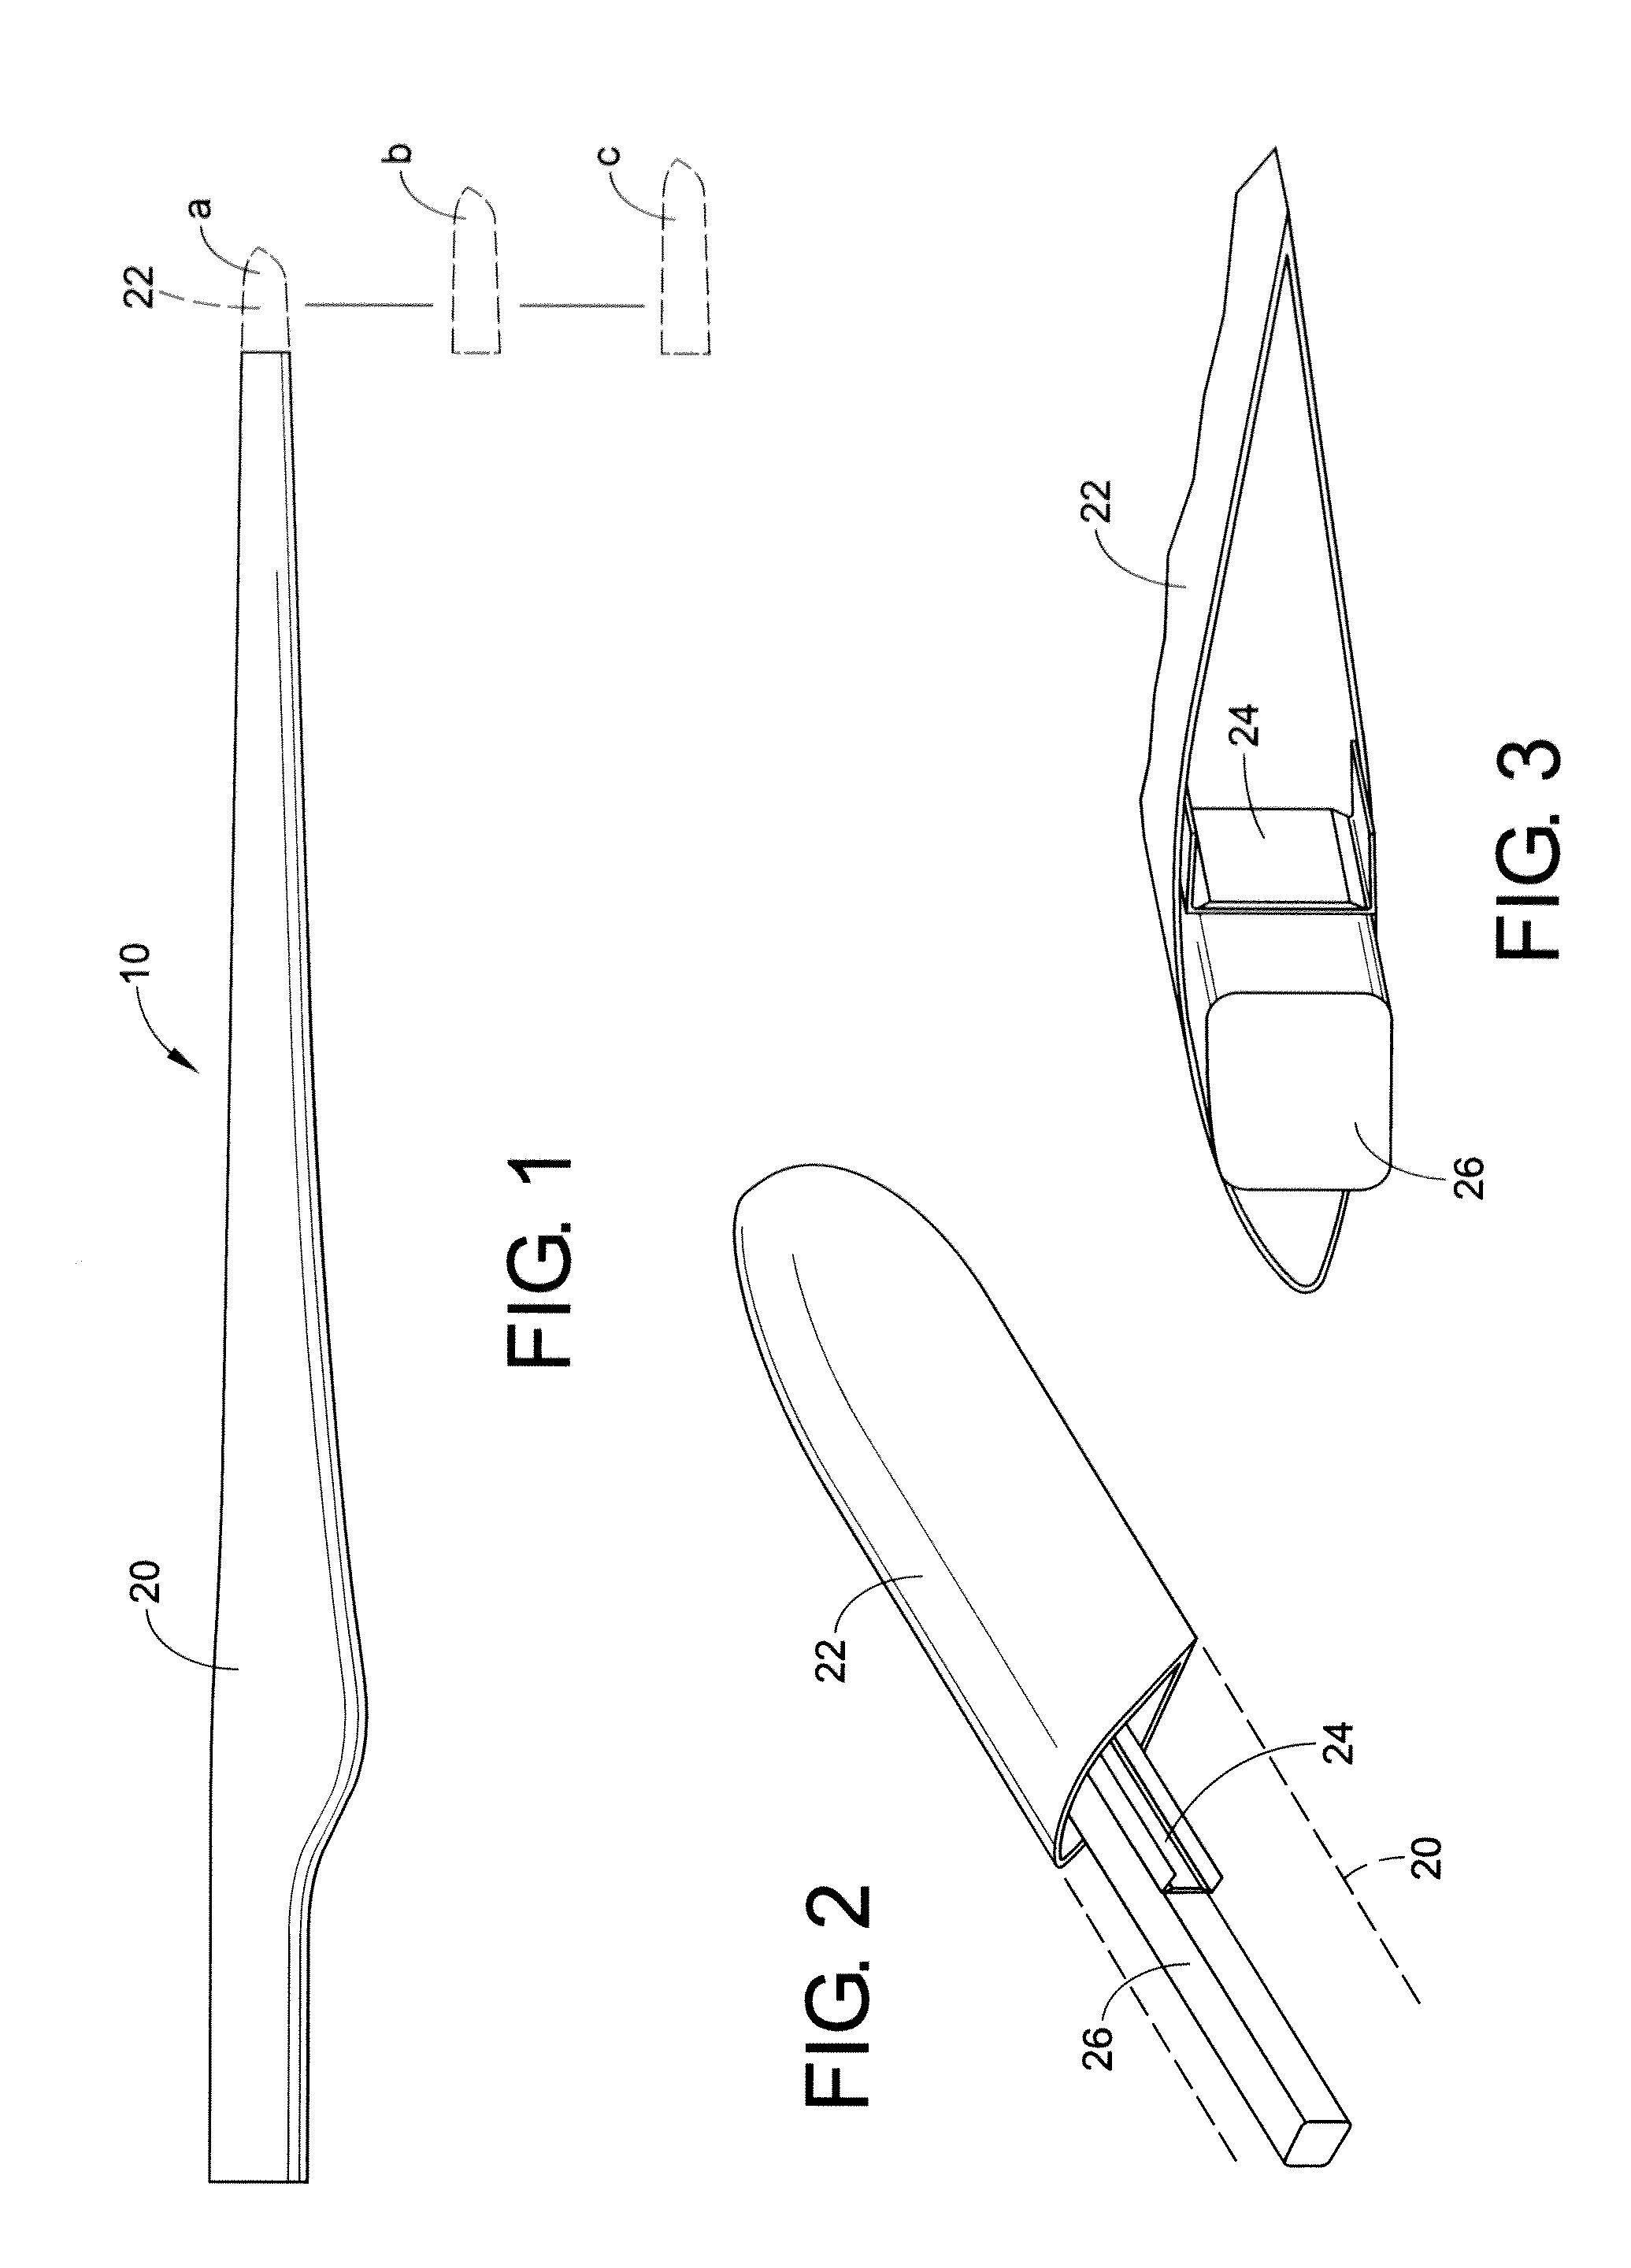 Method for site specific energy capture optimization through modular rotor blade tip extension